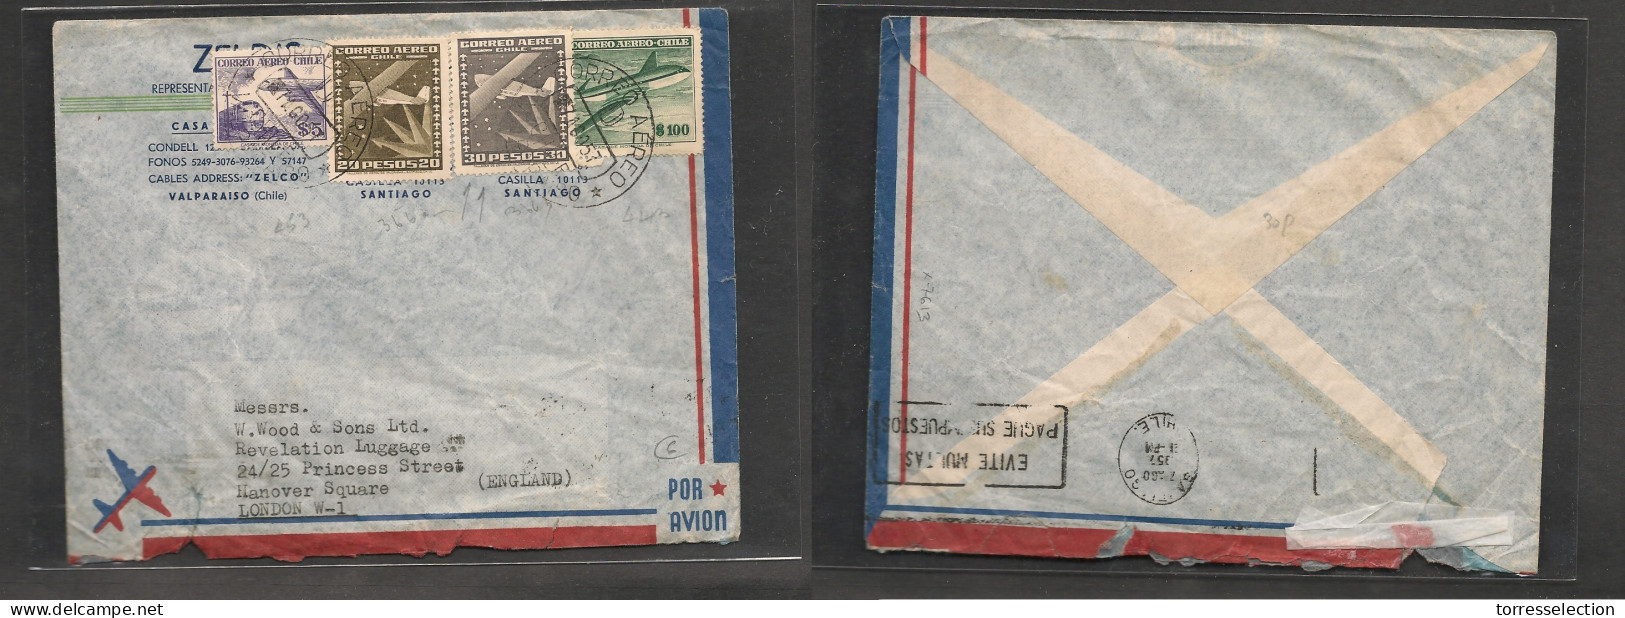 CHILE. Chile Cover - 1957 Valp To London UK Air Mult Fkd Env 175 Pesos Rate Incl 50p Fine Usage - Chile